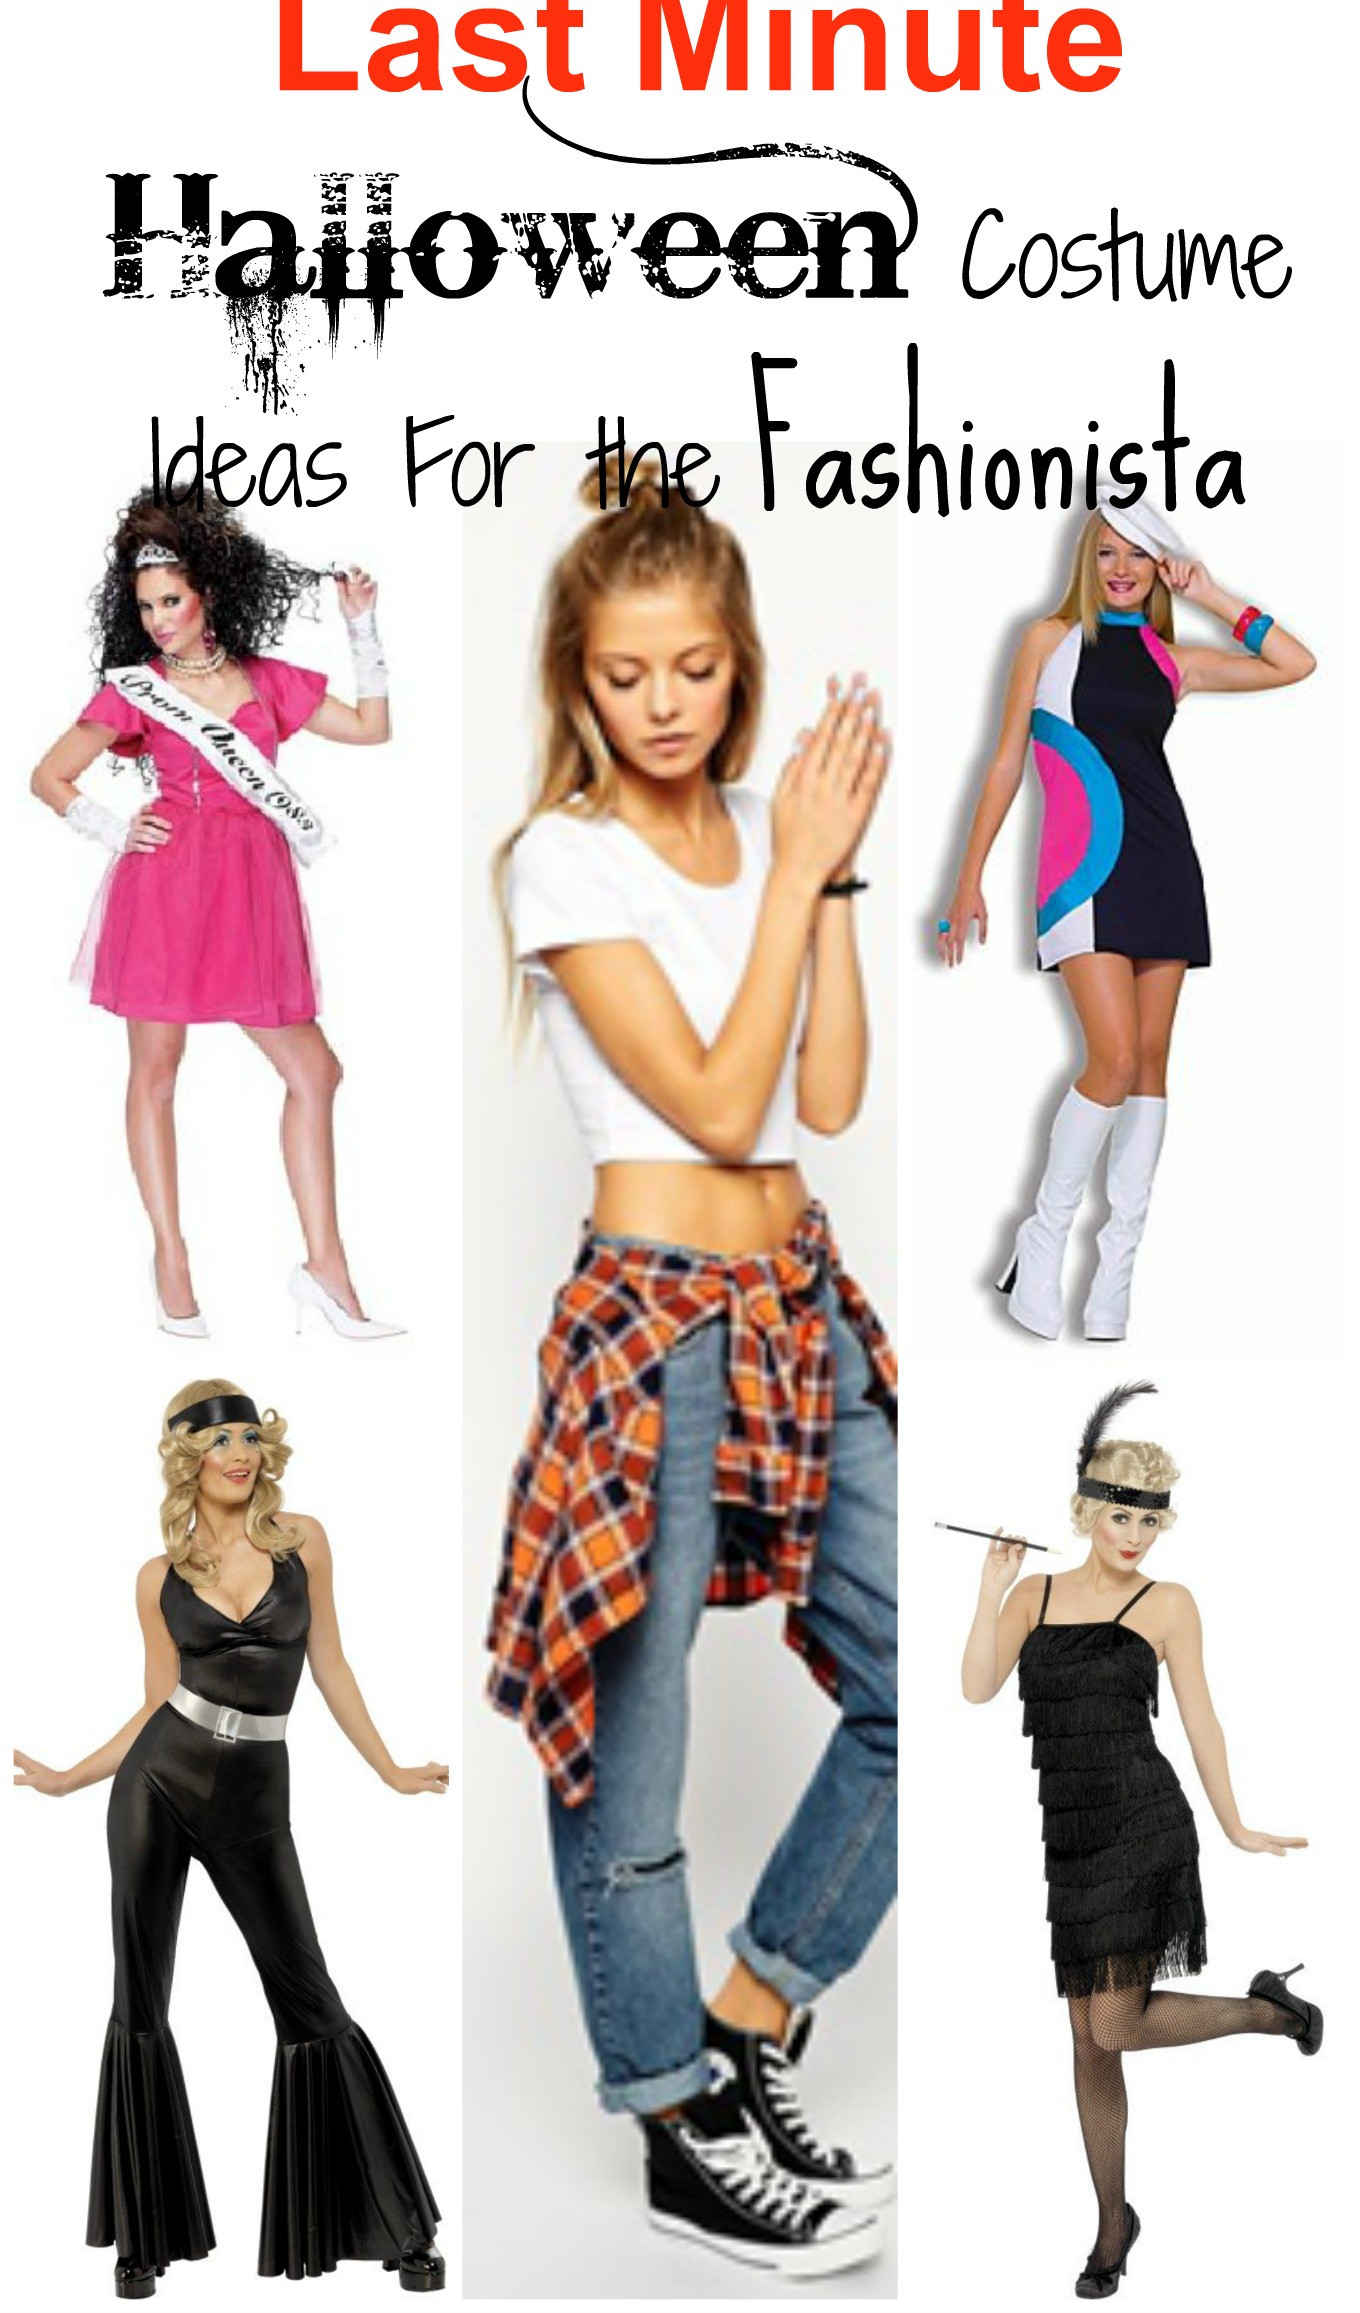 Last Minute DIY Costumes For Adults
 5 Last Minute Halloween Costume Ideas For The Fashionista